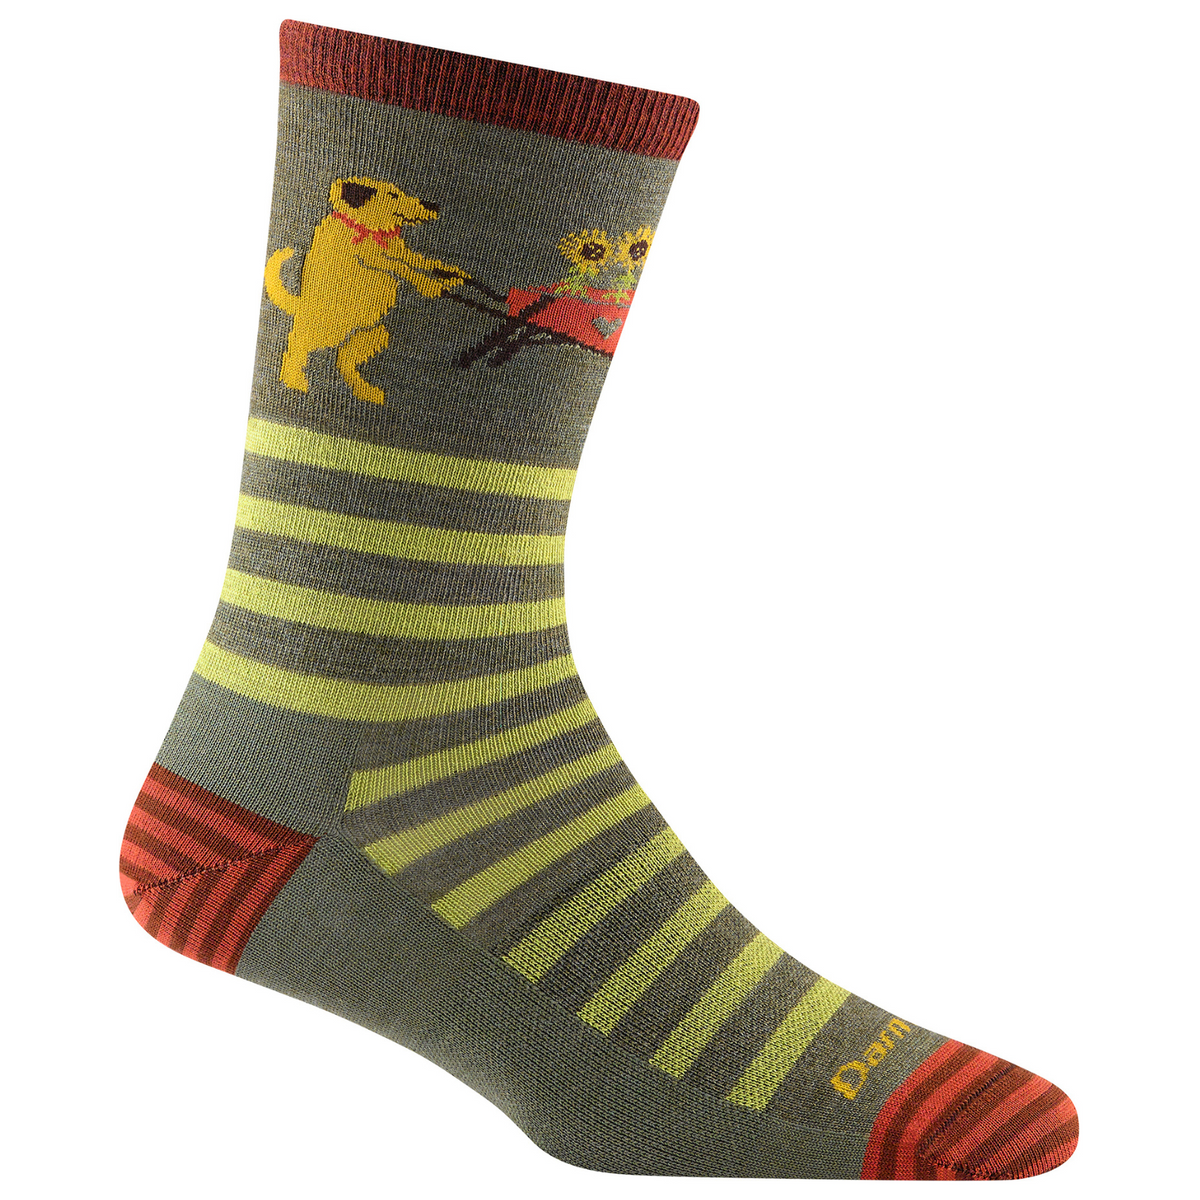 Darn Tough 6037 Animal Haus Lightweight Cushion Crew women&#39;s sock featuring olive green sock with green stripes and yellow dog with wheelbarrow of sunflowers at top. Sock shown on display foot. 